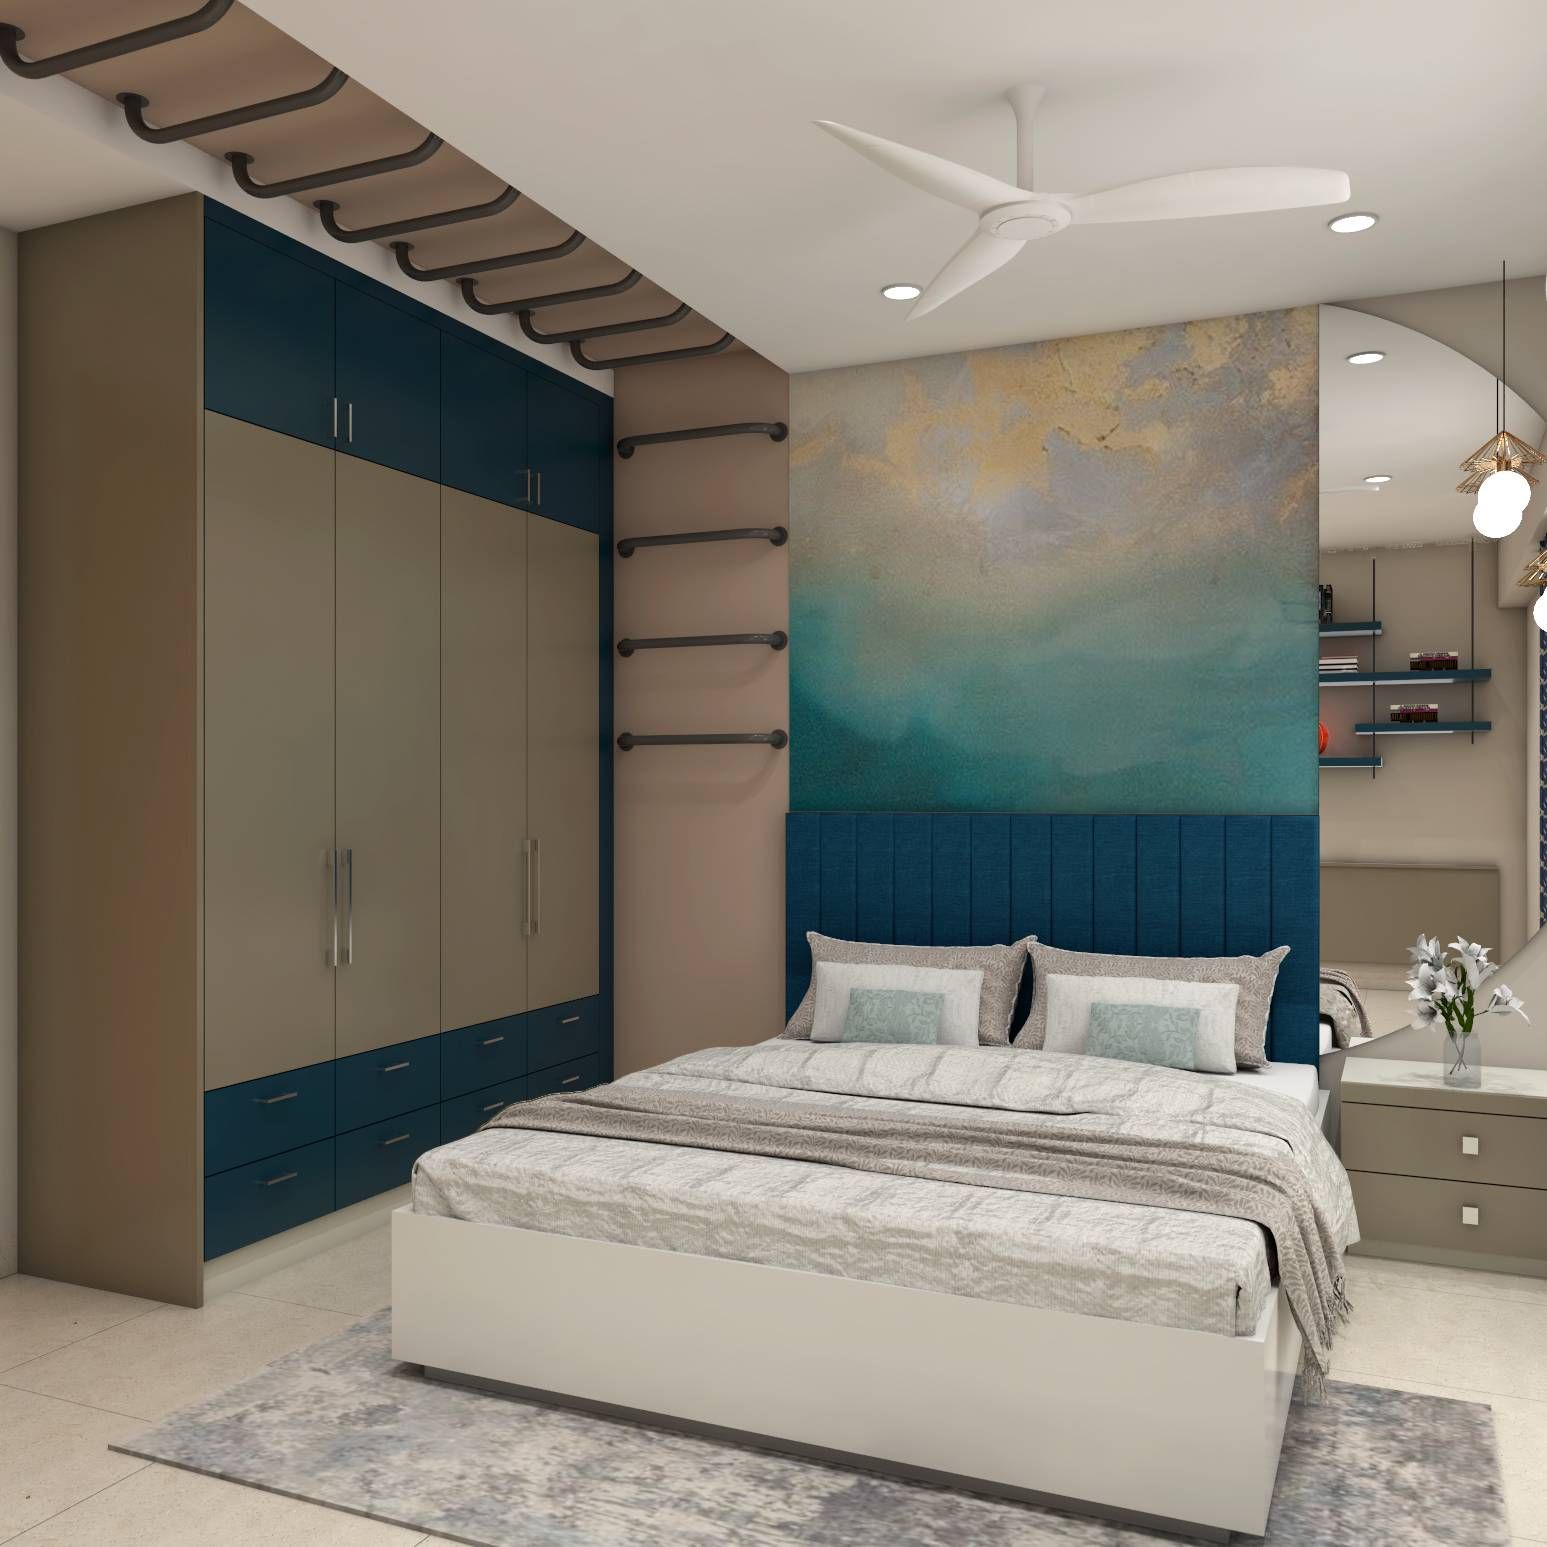 Contemporary Kids Room Design With A Dual-Tone Swing Wardrobe